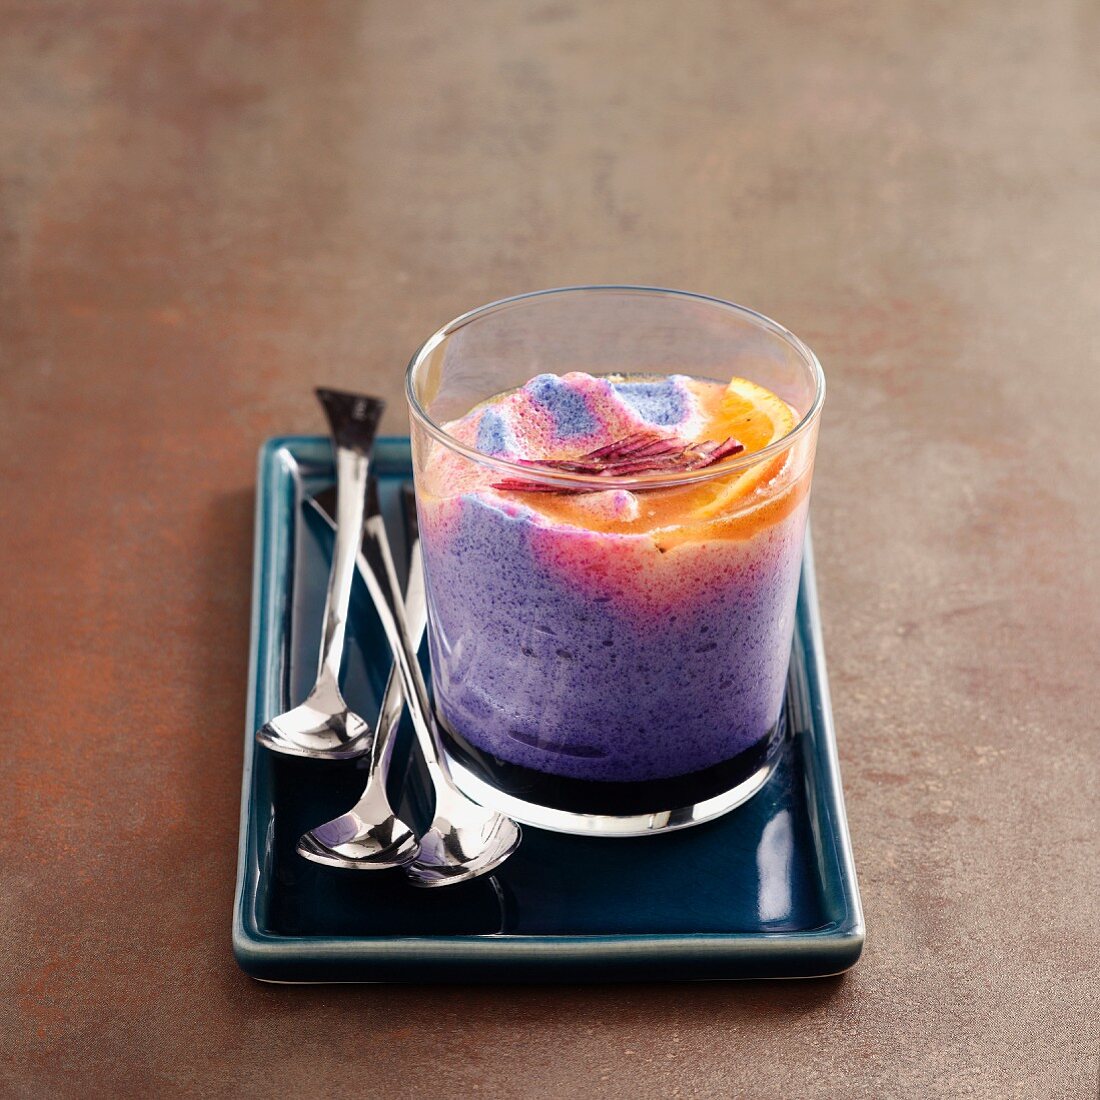 Red cabbage mousse with citrus fruit french dresing